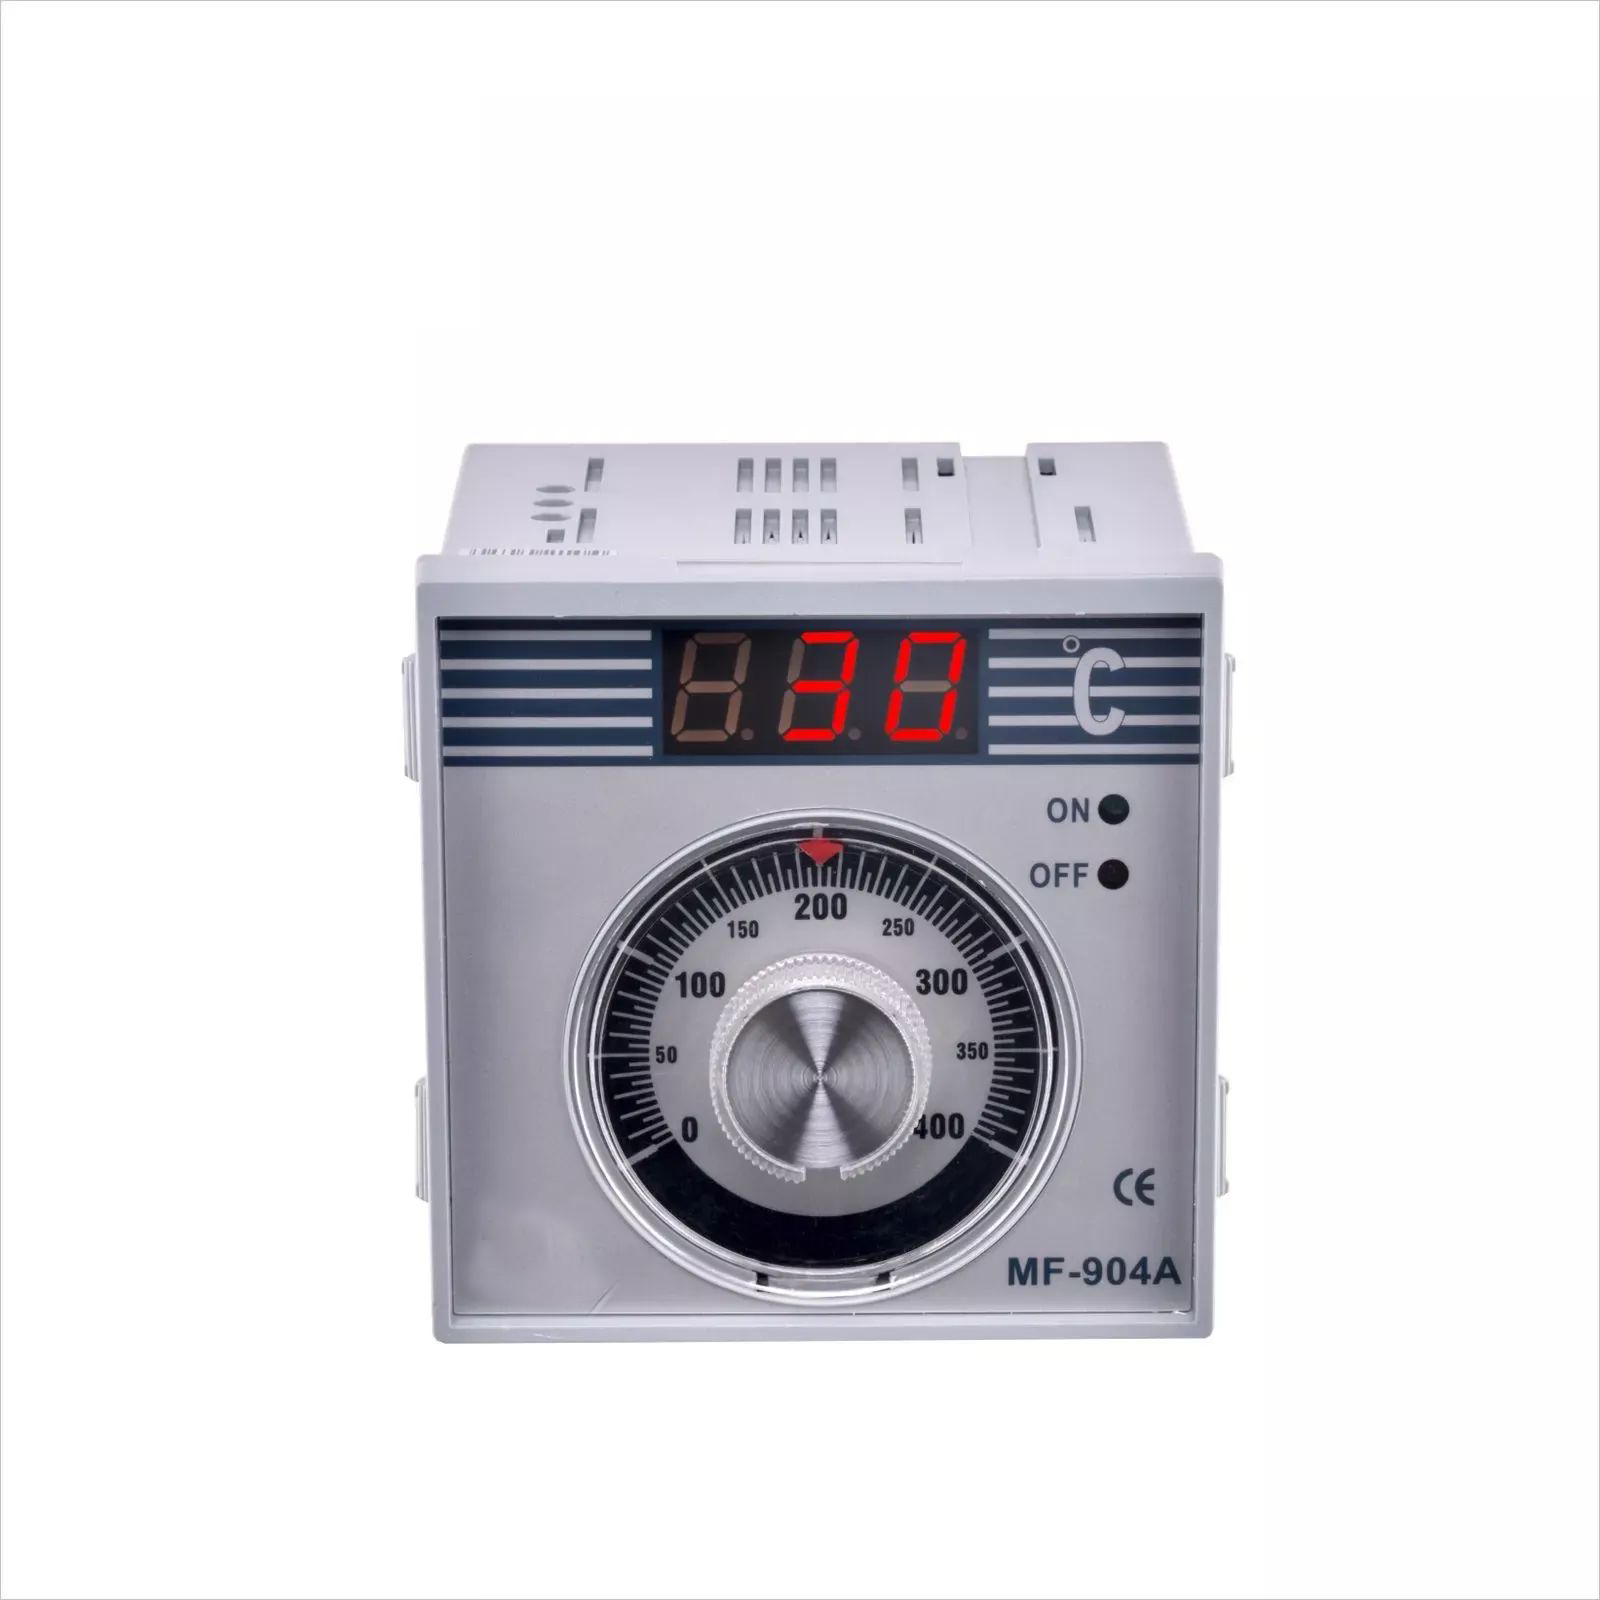 MF904A multifunction digital bakery oven temperature controller with thermocouple